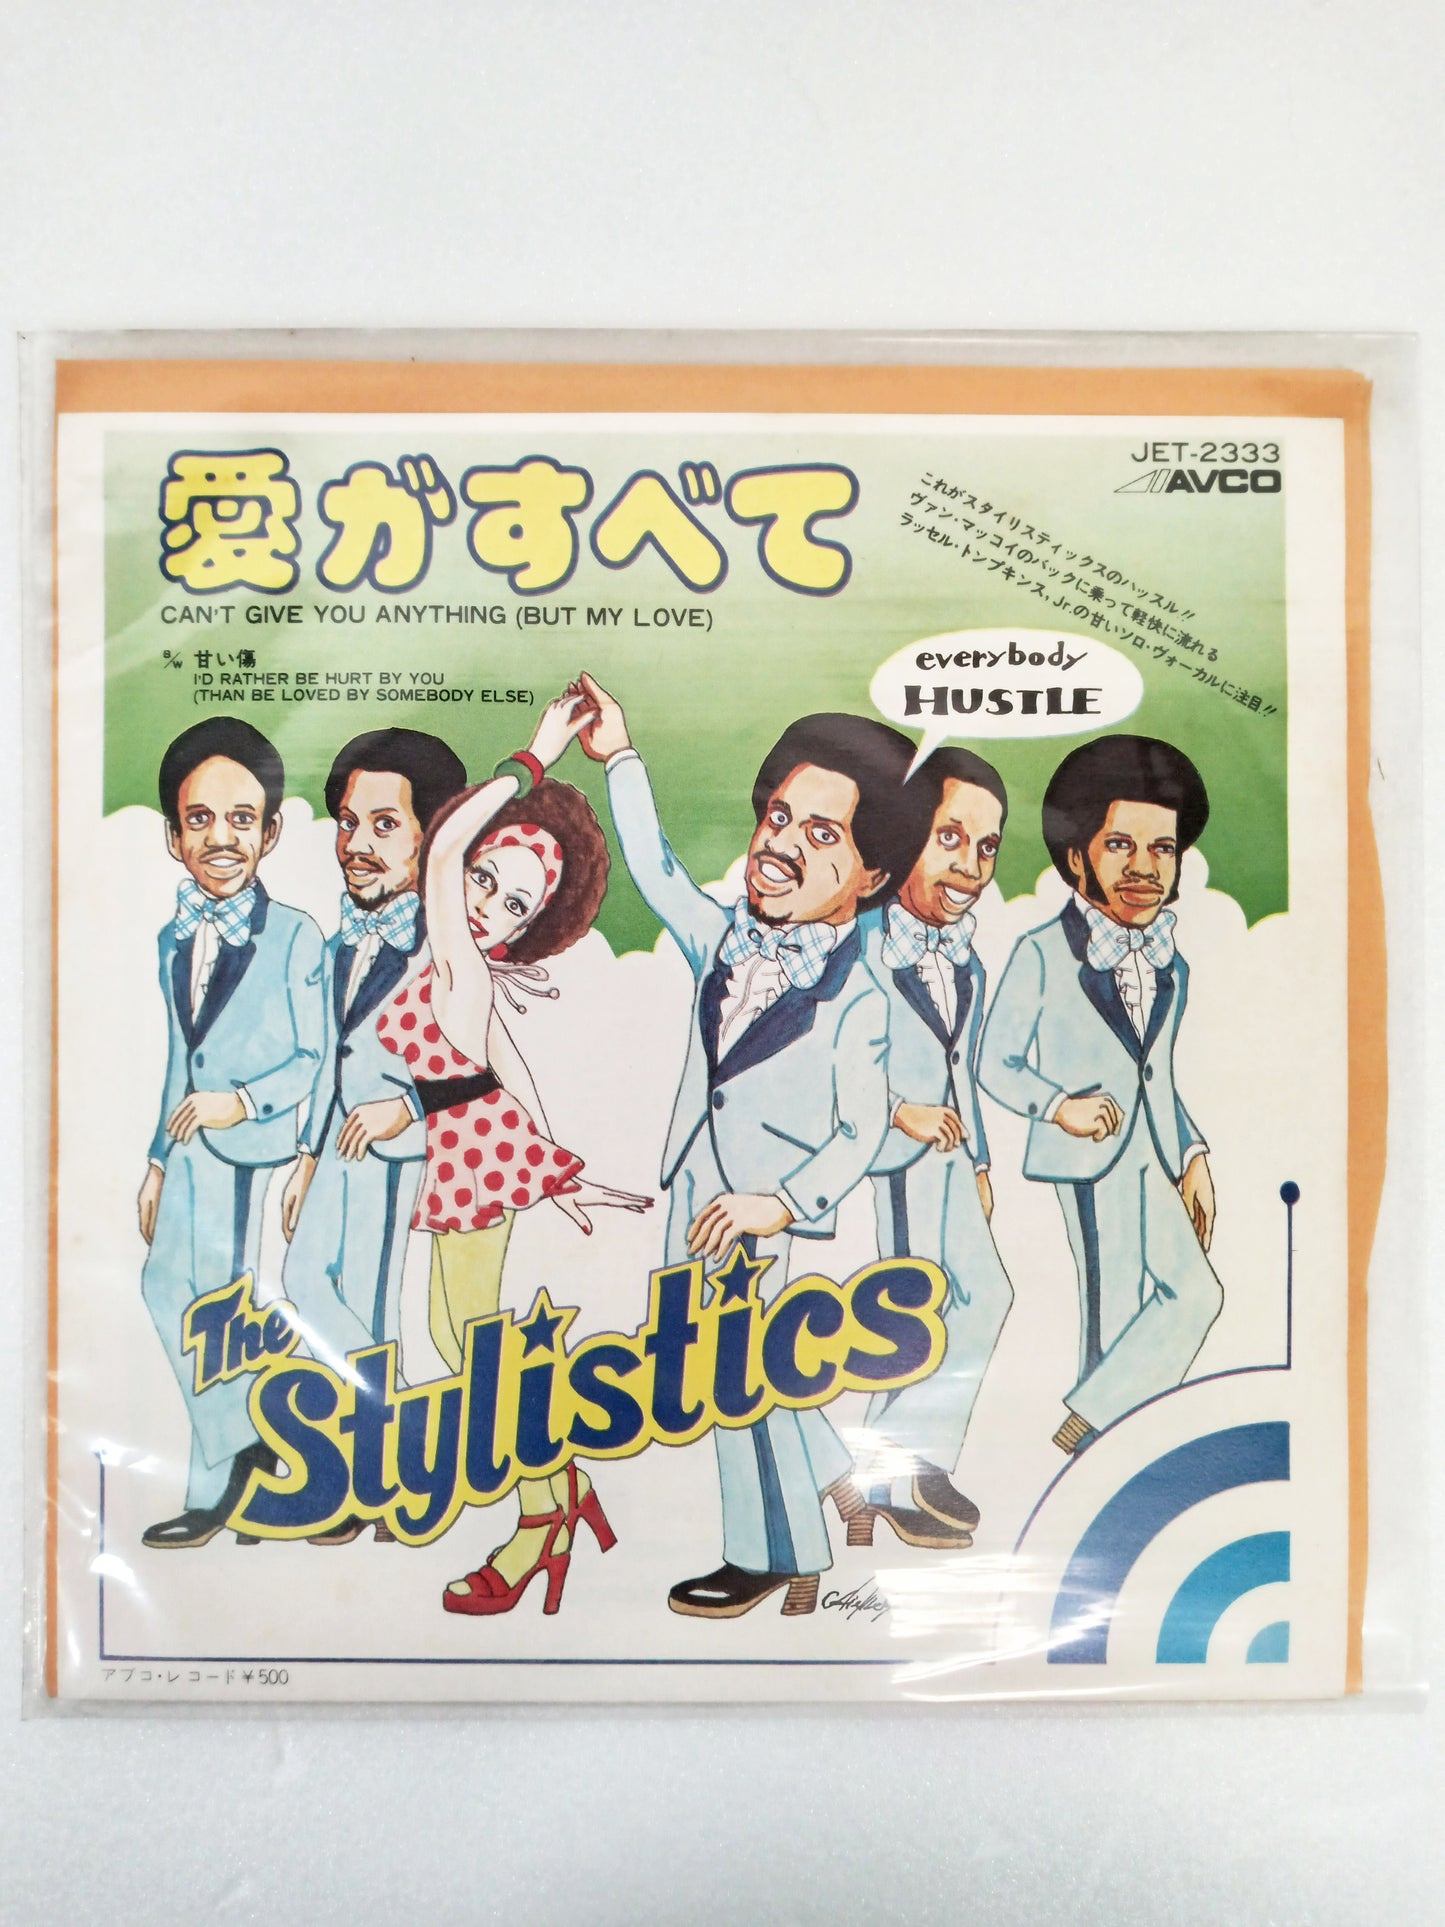 1975 Love Is Everything Stylistics B: Sweet Scars Japanese record vintage